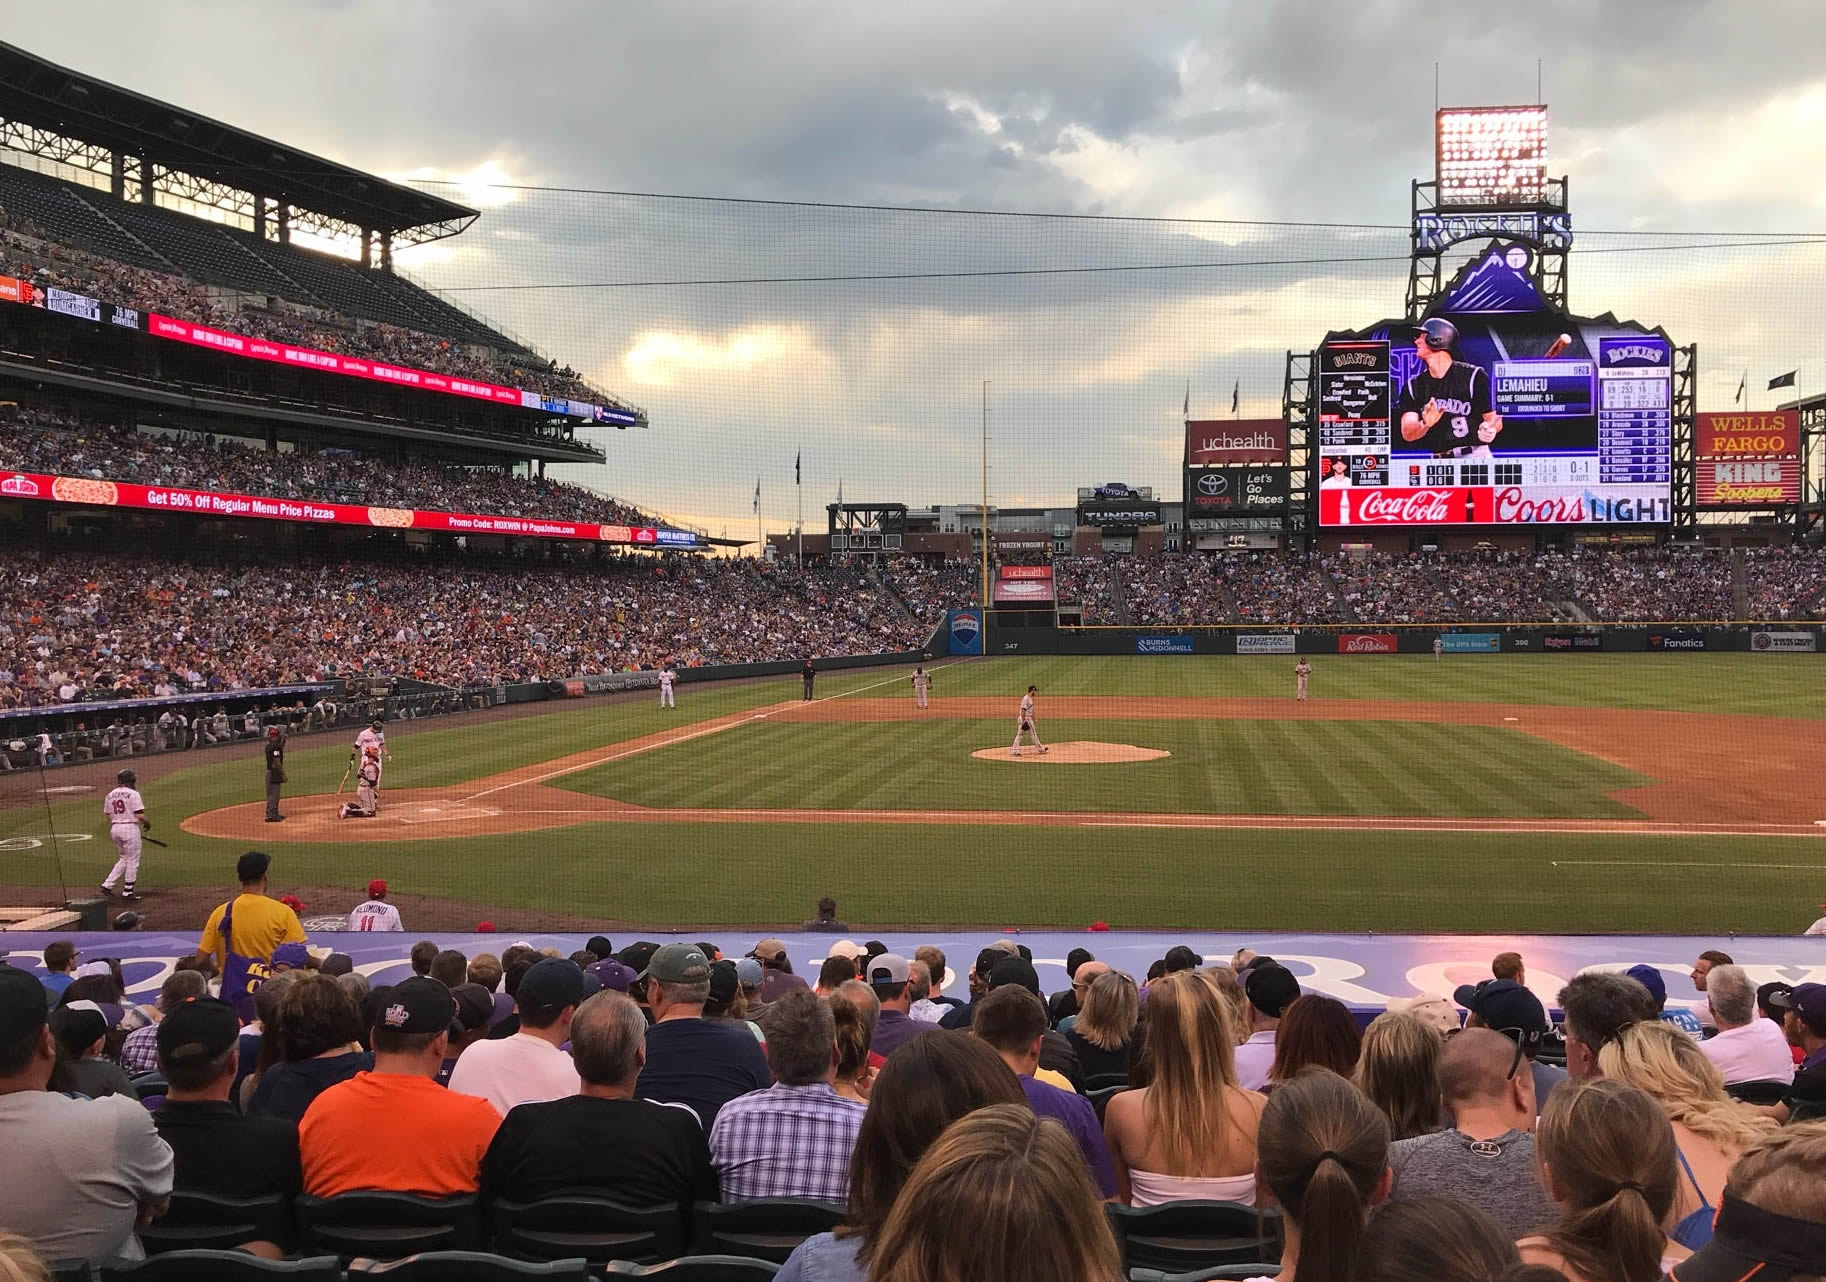 coors field seating chart view